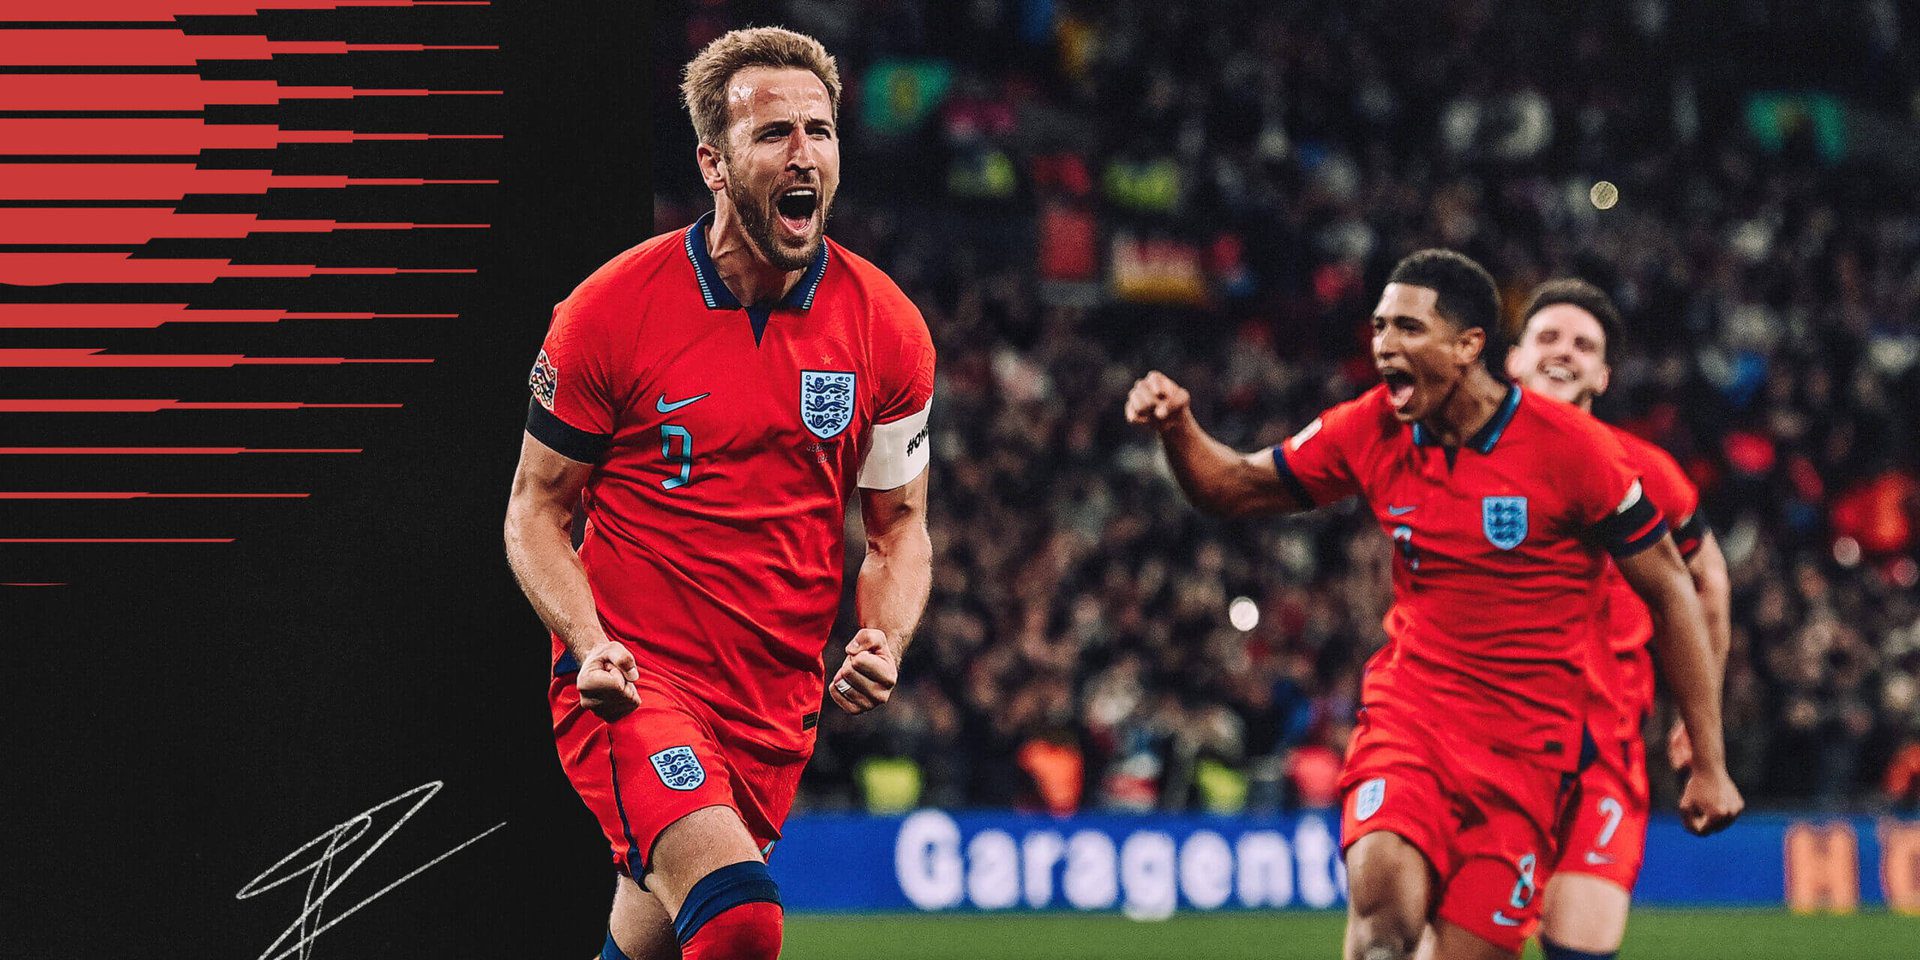 England World Cup 2022 Team Guide: Southgate will stick to the trusted experience - for good or bad